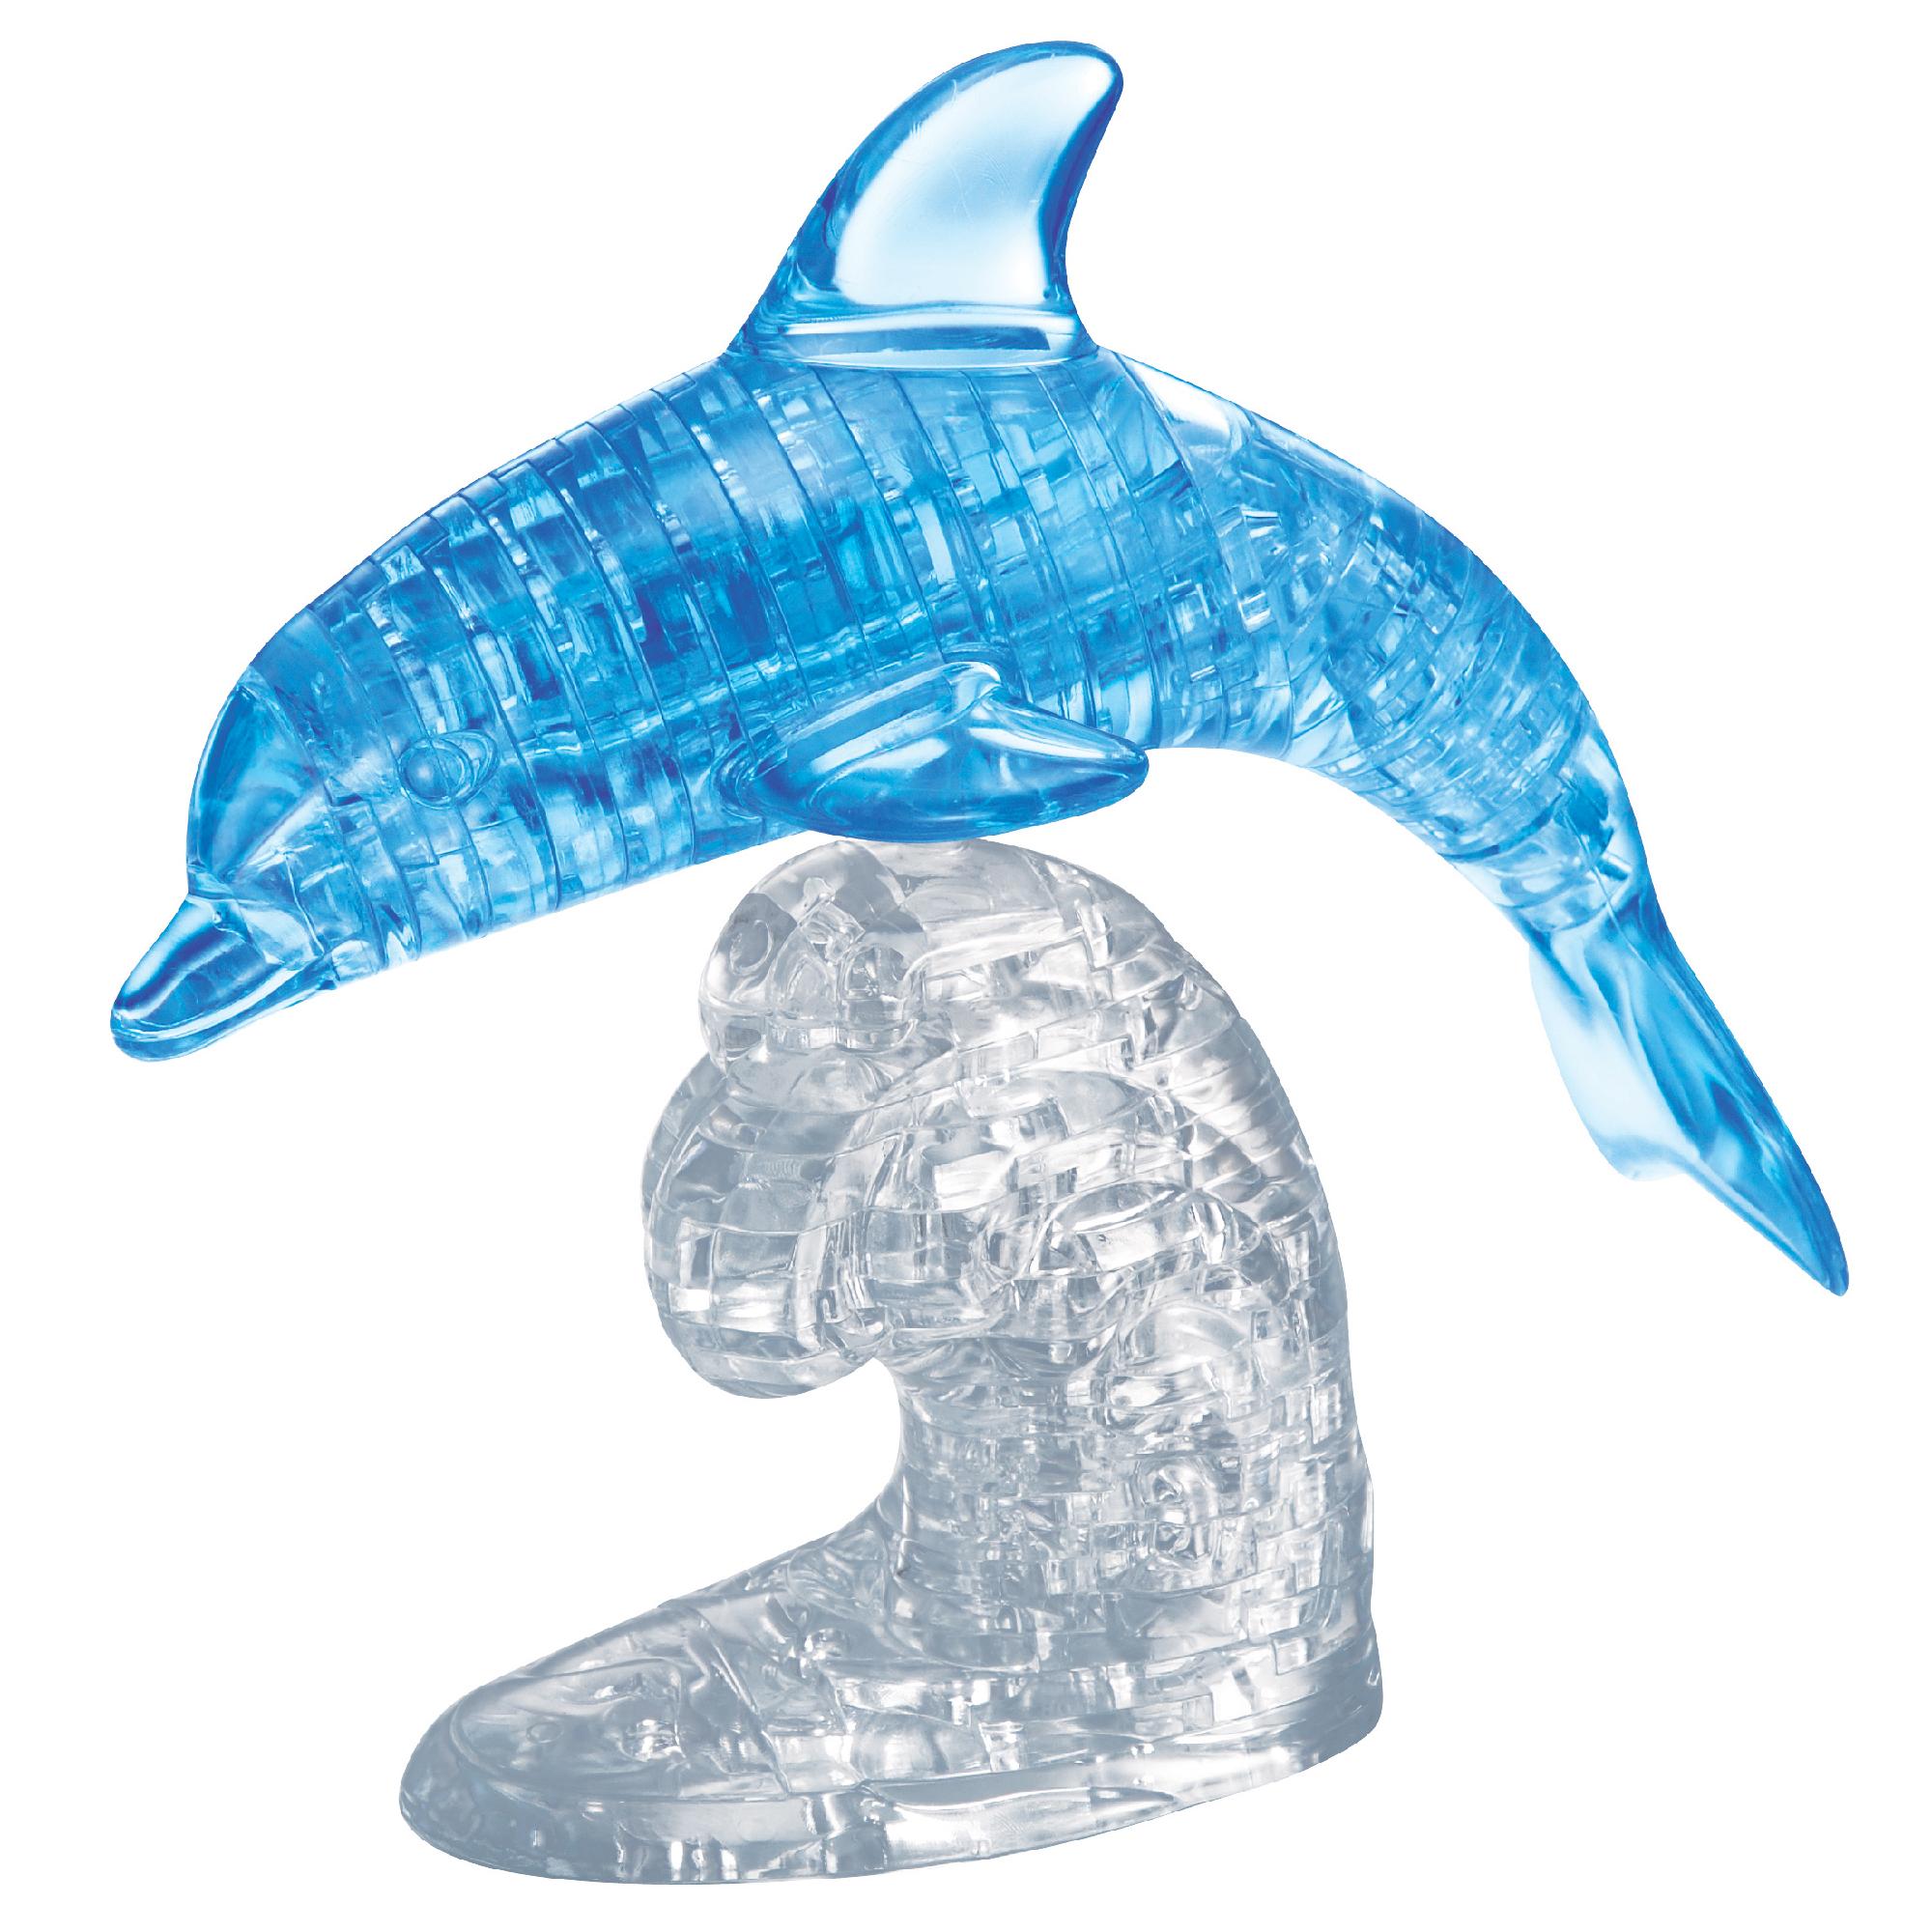 Bepuzzled 3D Crystal Puzzle - Dolphin: 95 Pcs